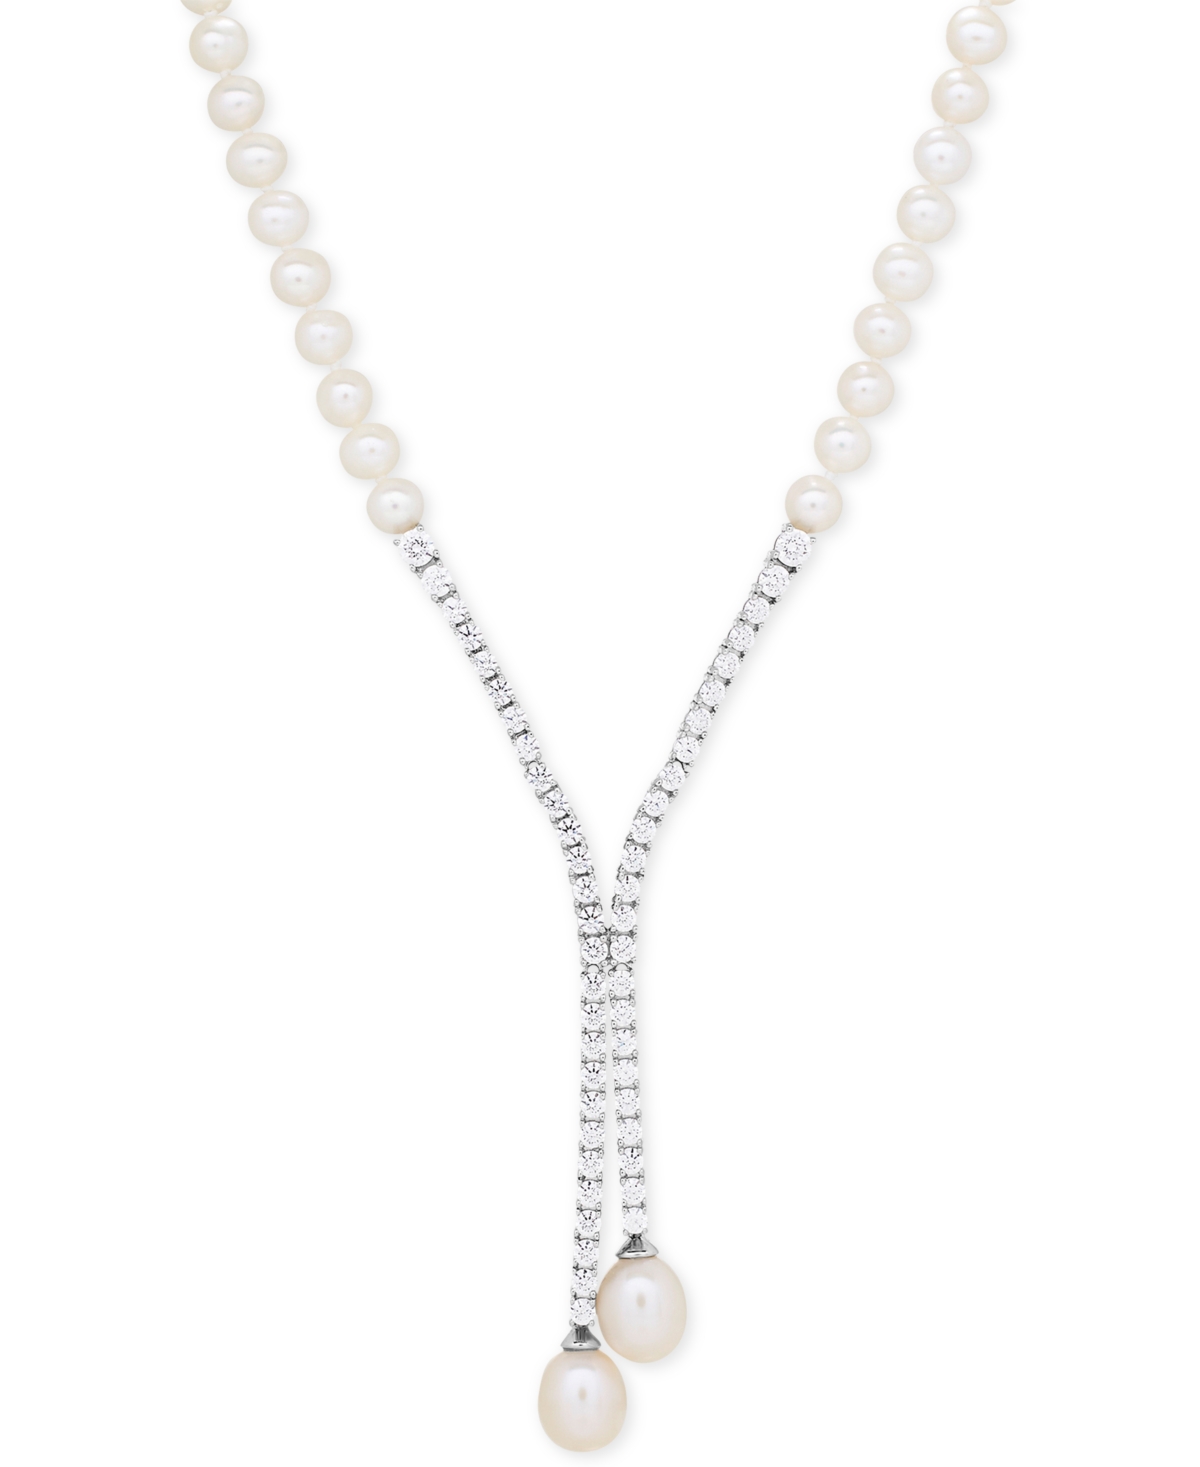 Cultured Freshwater Pearl (5mm & 10 x 8mm) & Cubic Zirconia Lariat Necklace in Sterling Silver, Created for Macy's - Silver